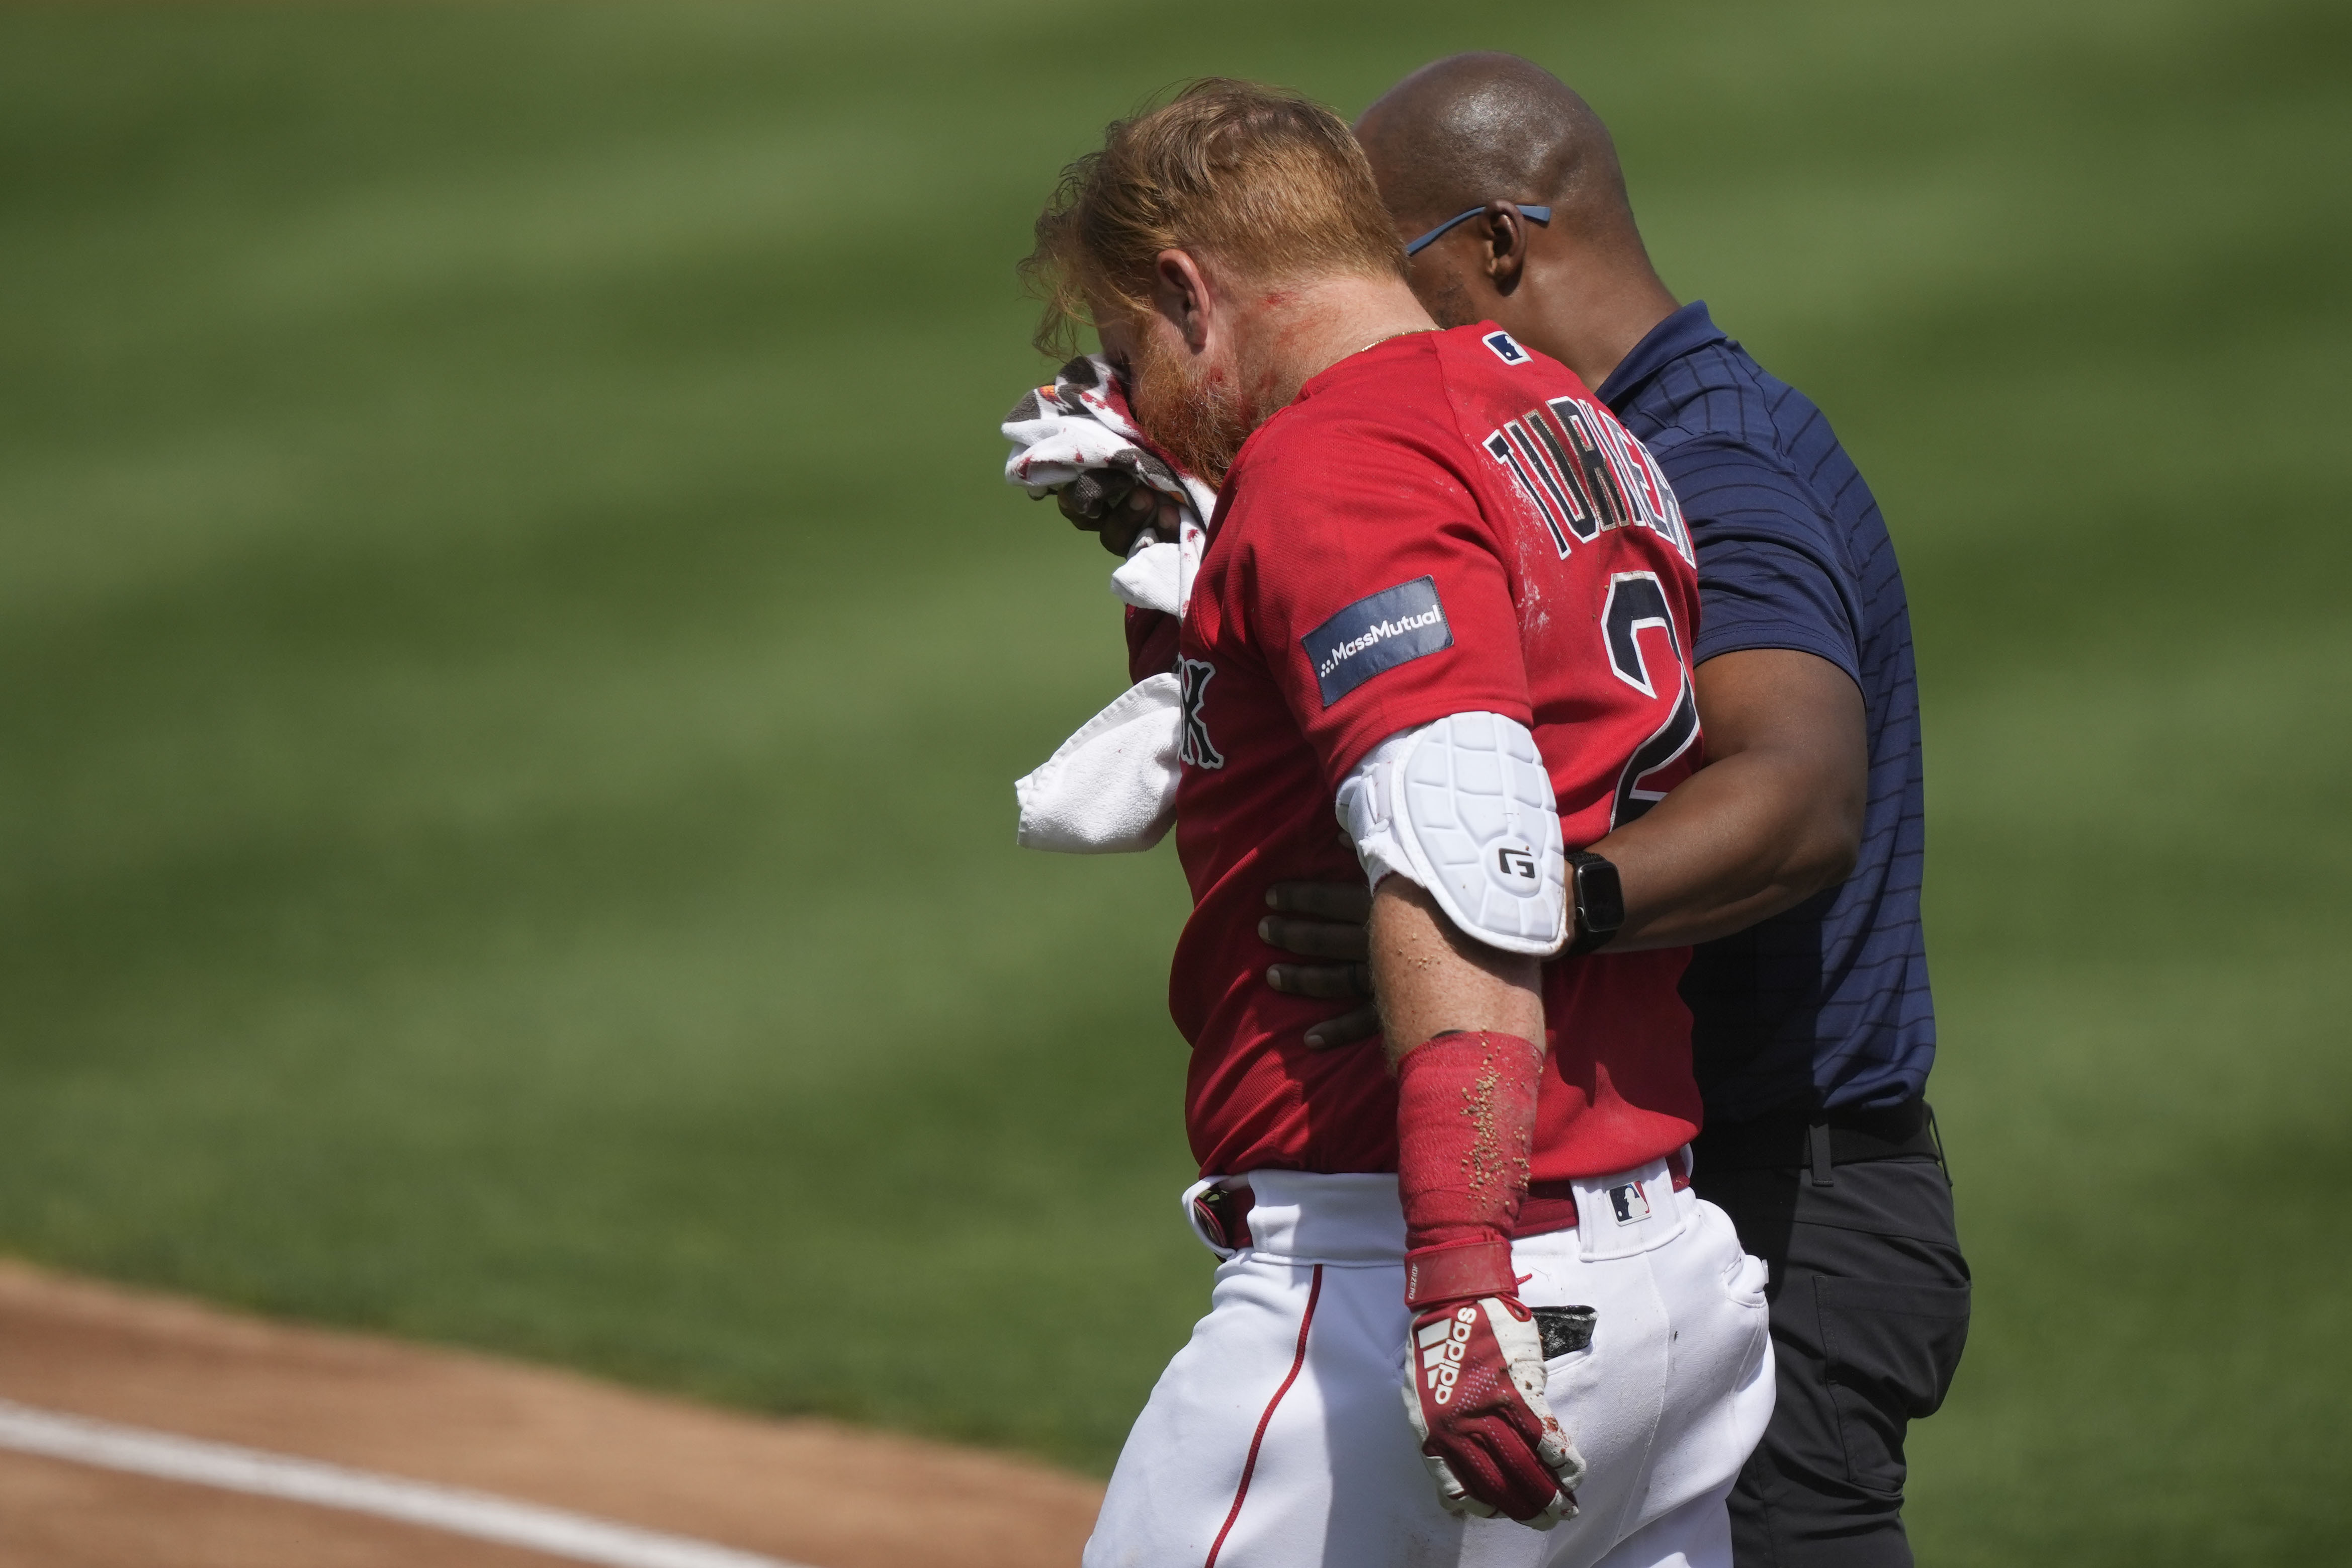 Boston's Justin Turner hit in face by pitch, leaves game - NBC Sports